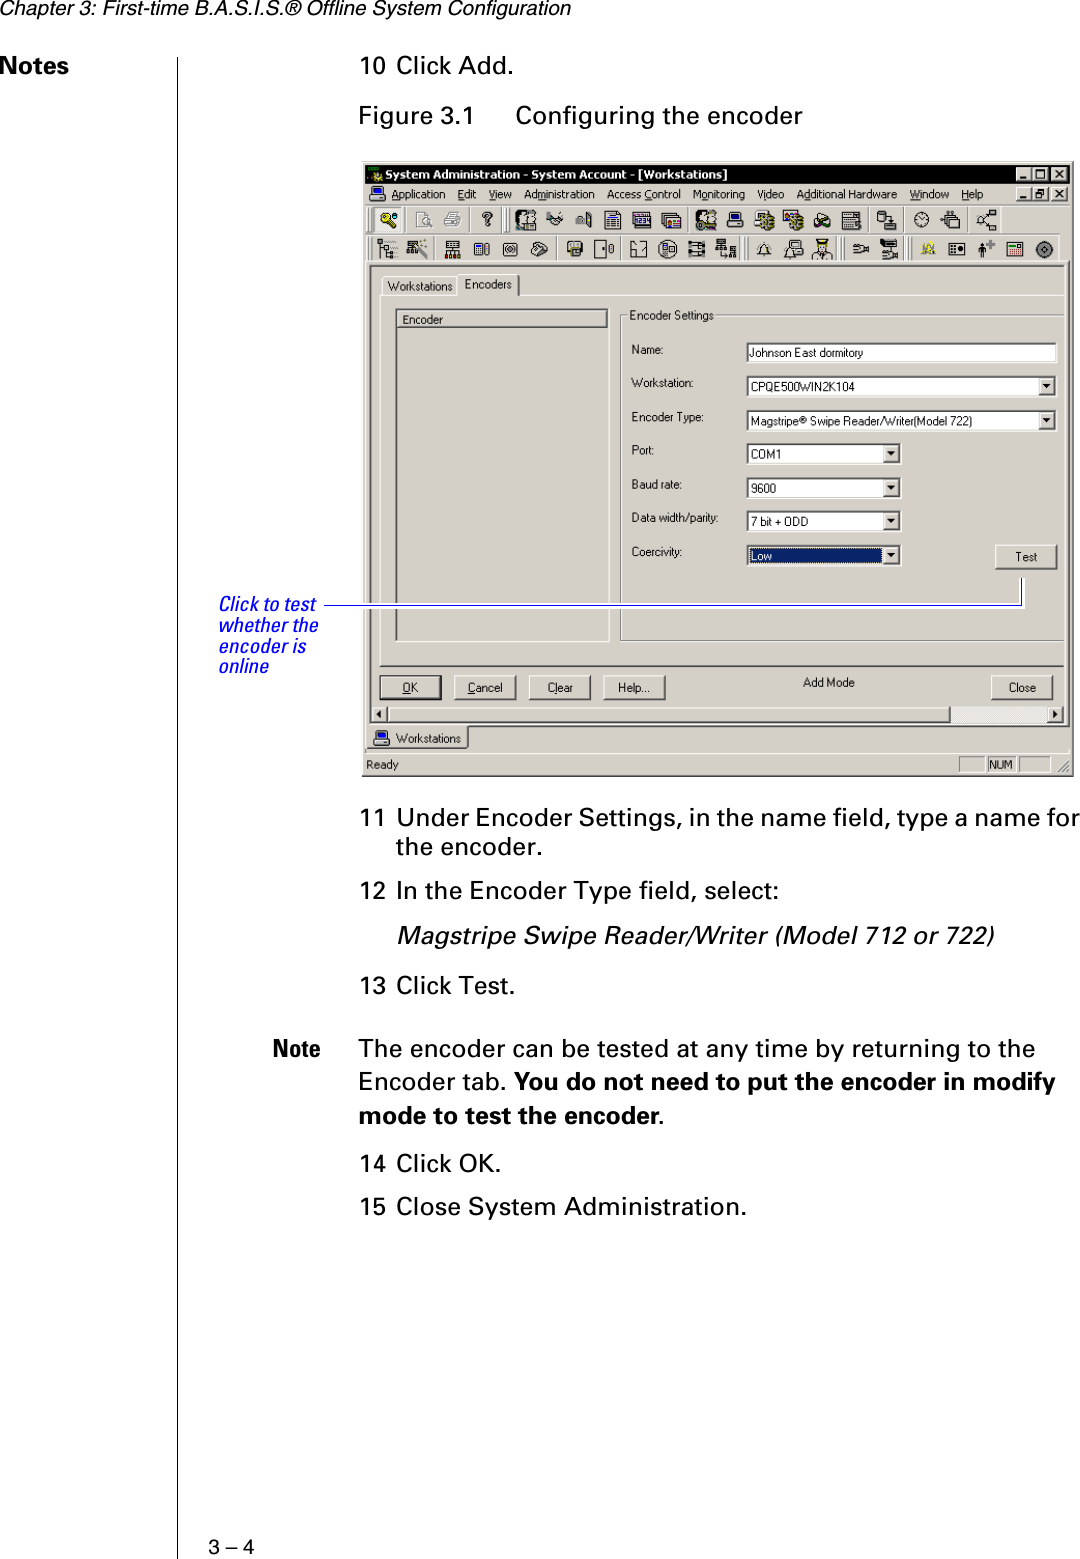 Chapter 3: First-time B.A.S.I.S.® Offline System Configuration3 – 4Notes 10 Click Add.11 Under Encoder Settings, in the name field, type a name for the encoder. 12 In the Encoder Type field, select:Magstripe Swipe Reader/Writer (Model 712 or 722)13 Click Test.Note The encoder can be tested at any time by returning to the Encoder tab. You do not need to put the encoder in modify mode to test the encoder.14 Click OK.15 Close System Administration.Figure 3.1  Configuring the encoderClick to test whether the encoder is online